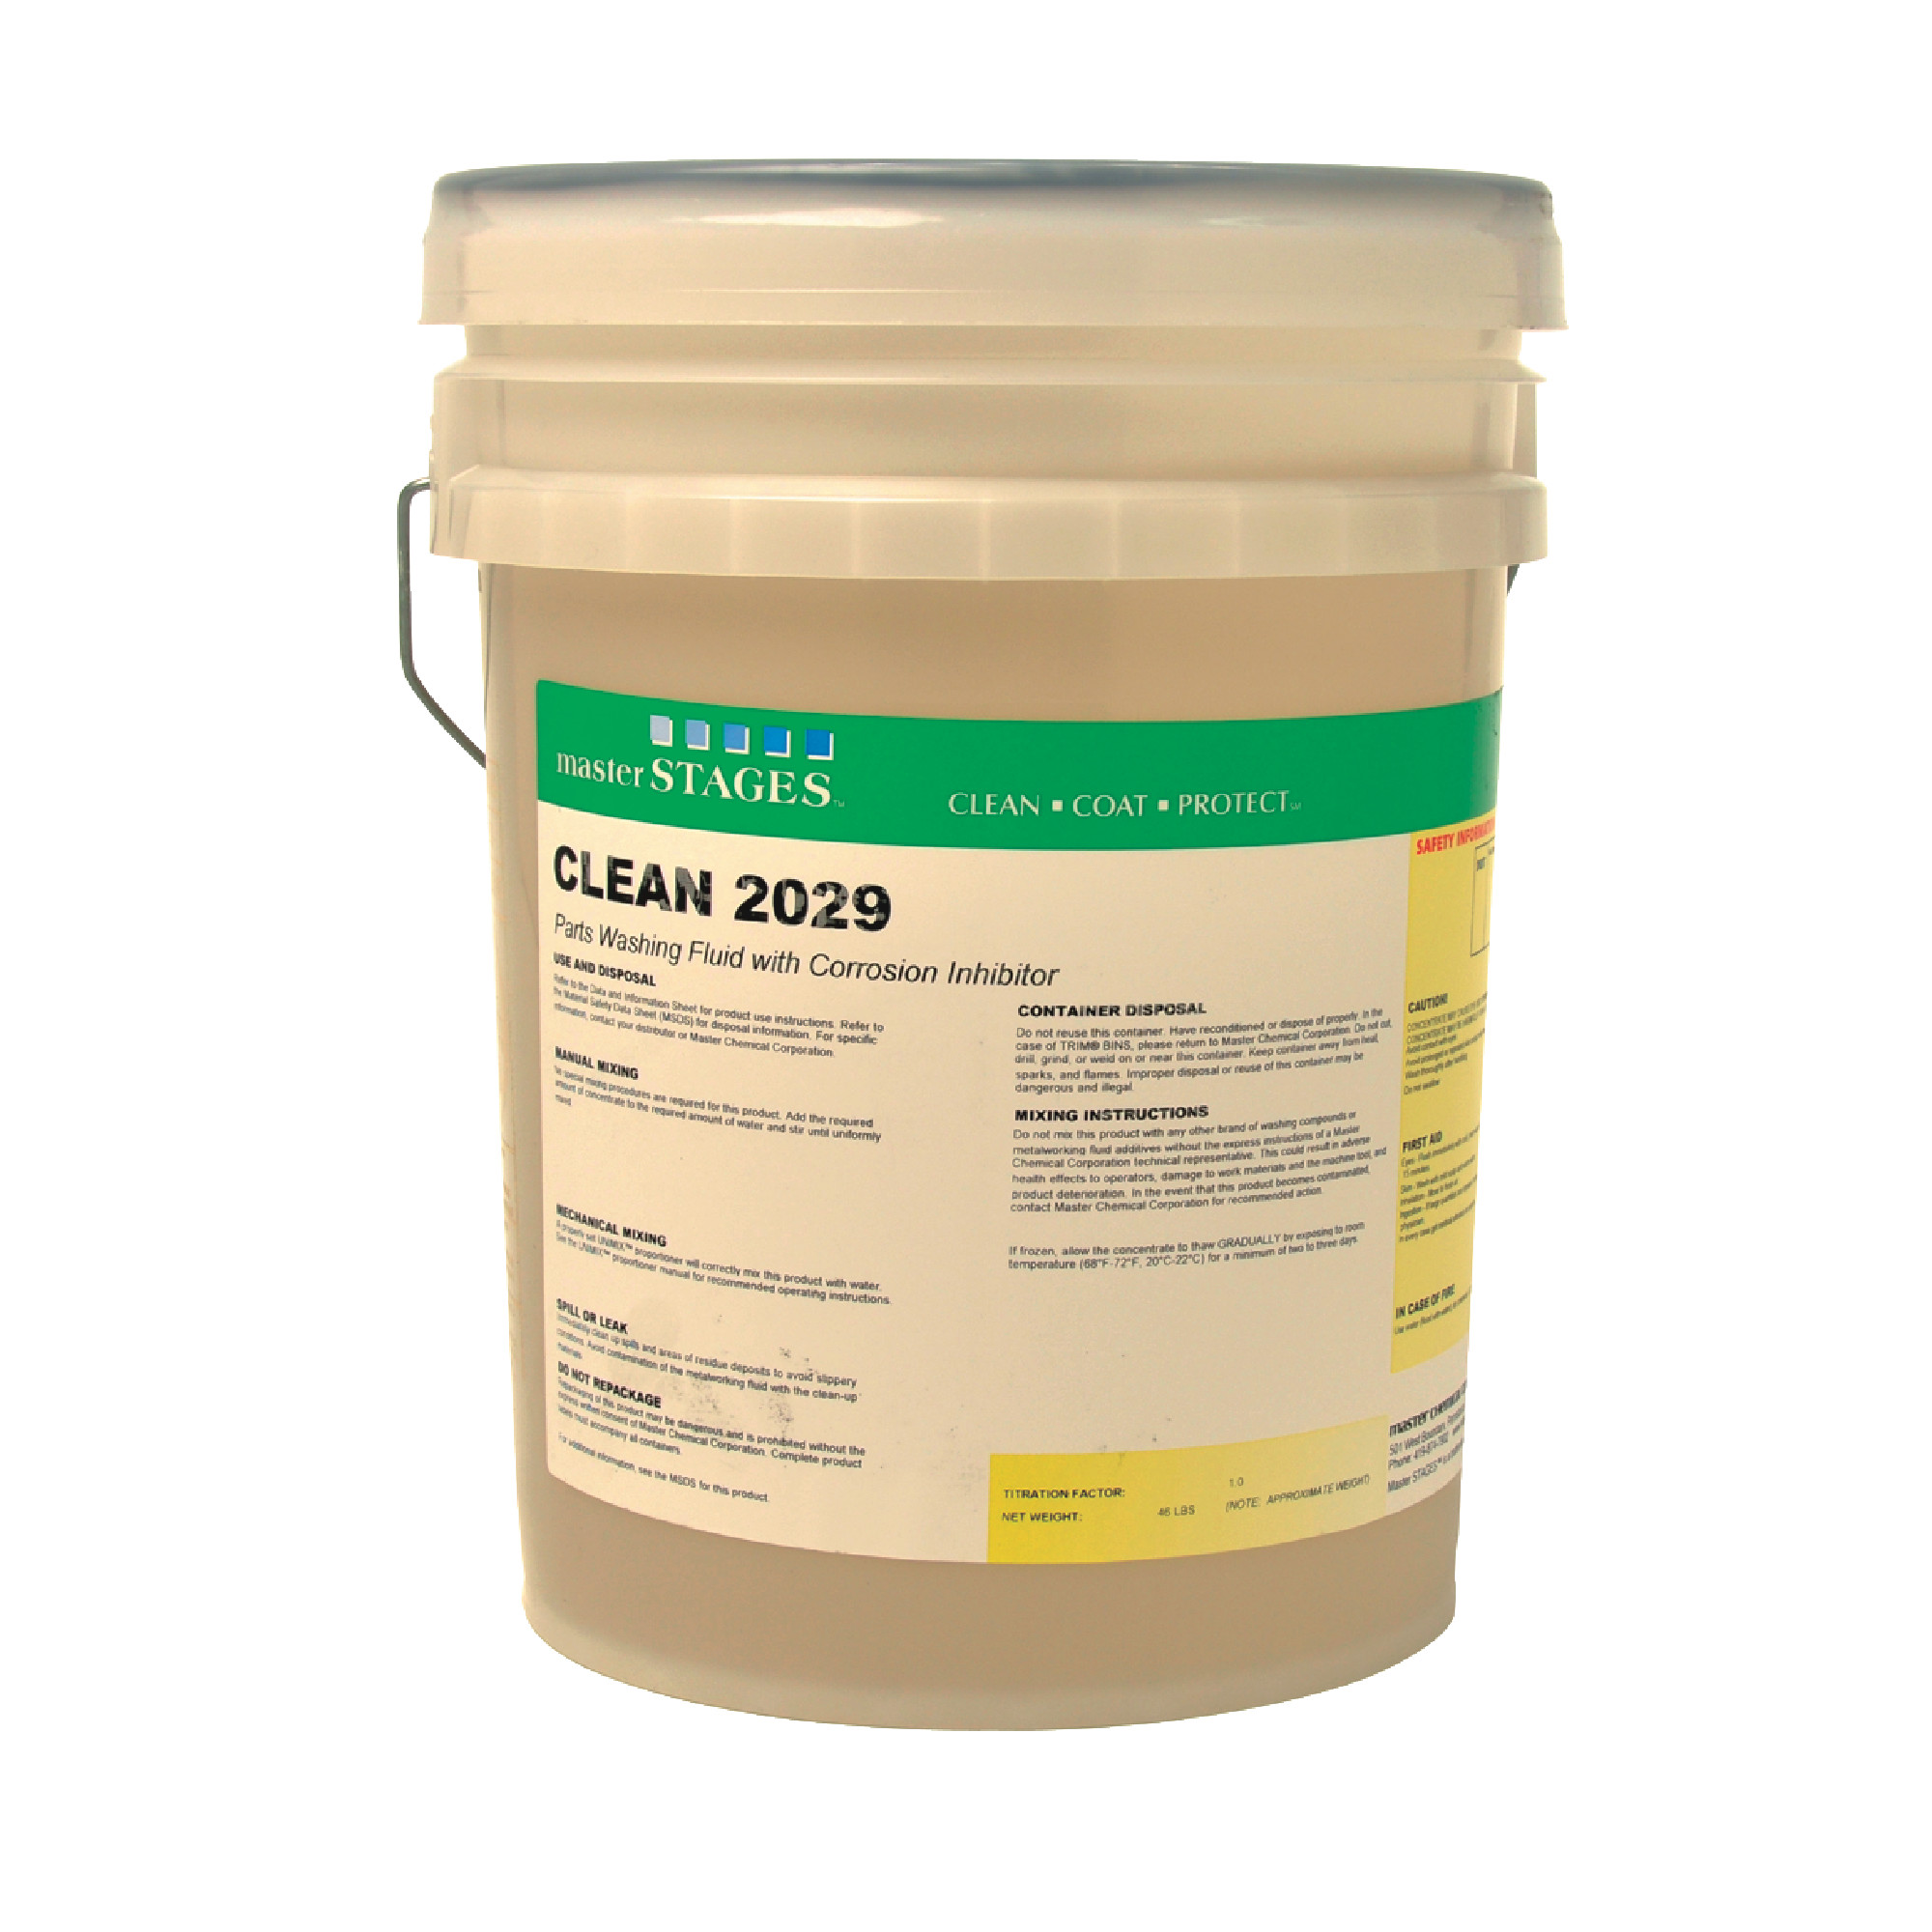 Master STAGES&#8482; CLEAN 2029 "One Step" 5 Gallon Parts Washing Fluid with Corrosion Inhibitor